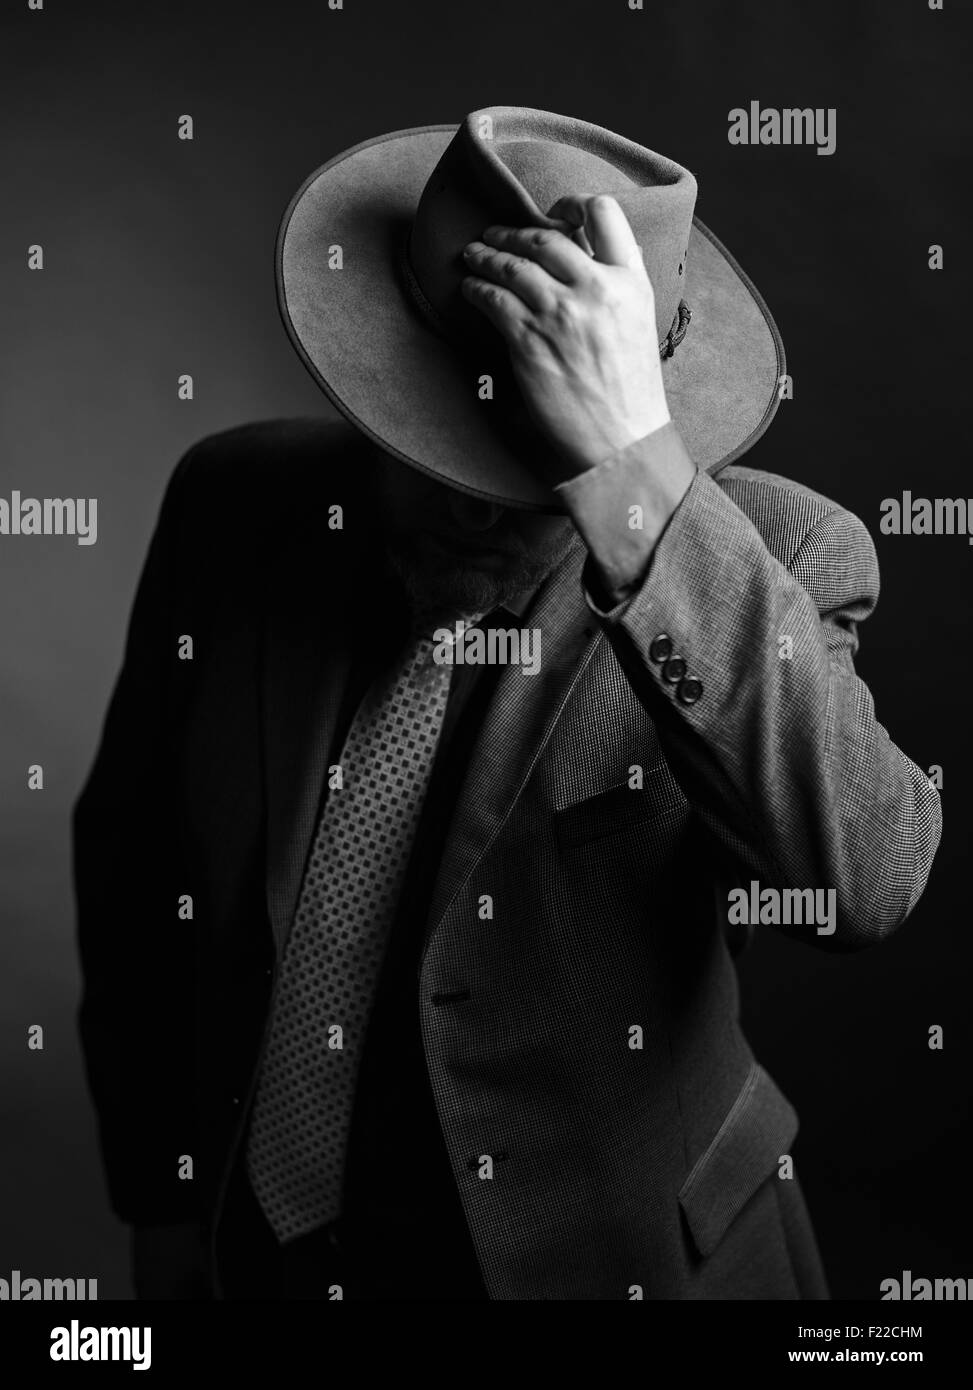 Male wearing dark suit and he covering face with a hat, black and white image Stock Photo